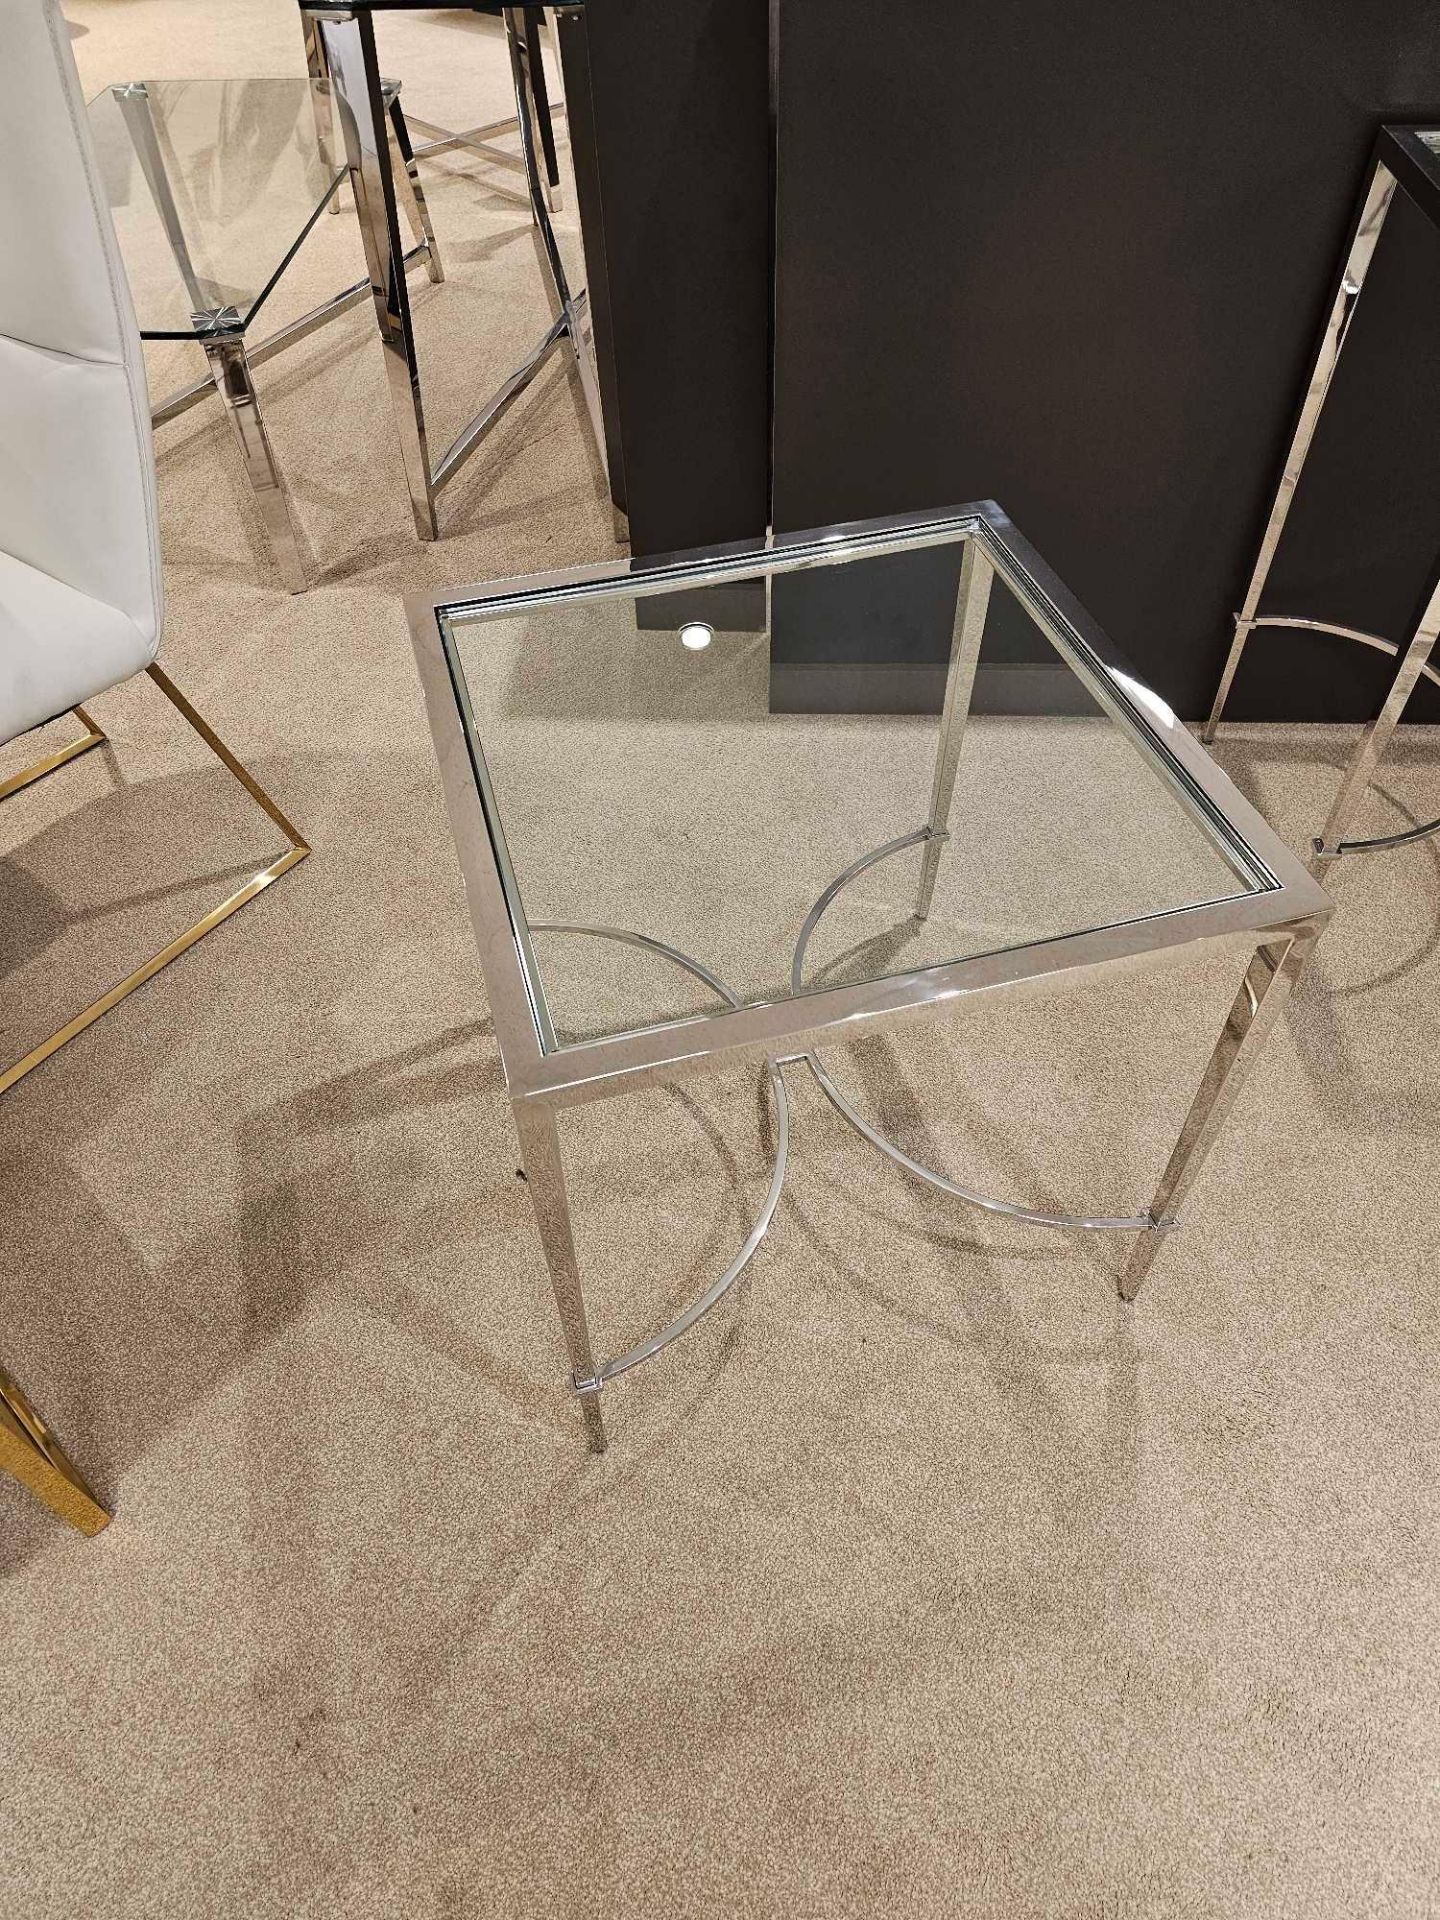 Tokyo Lamp Table by Kesterport The Tokyo lamp table with its clear glass top and a refined tapered - Image 5 of 6